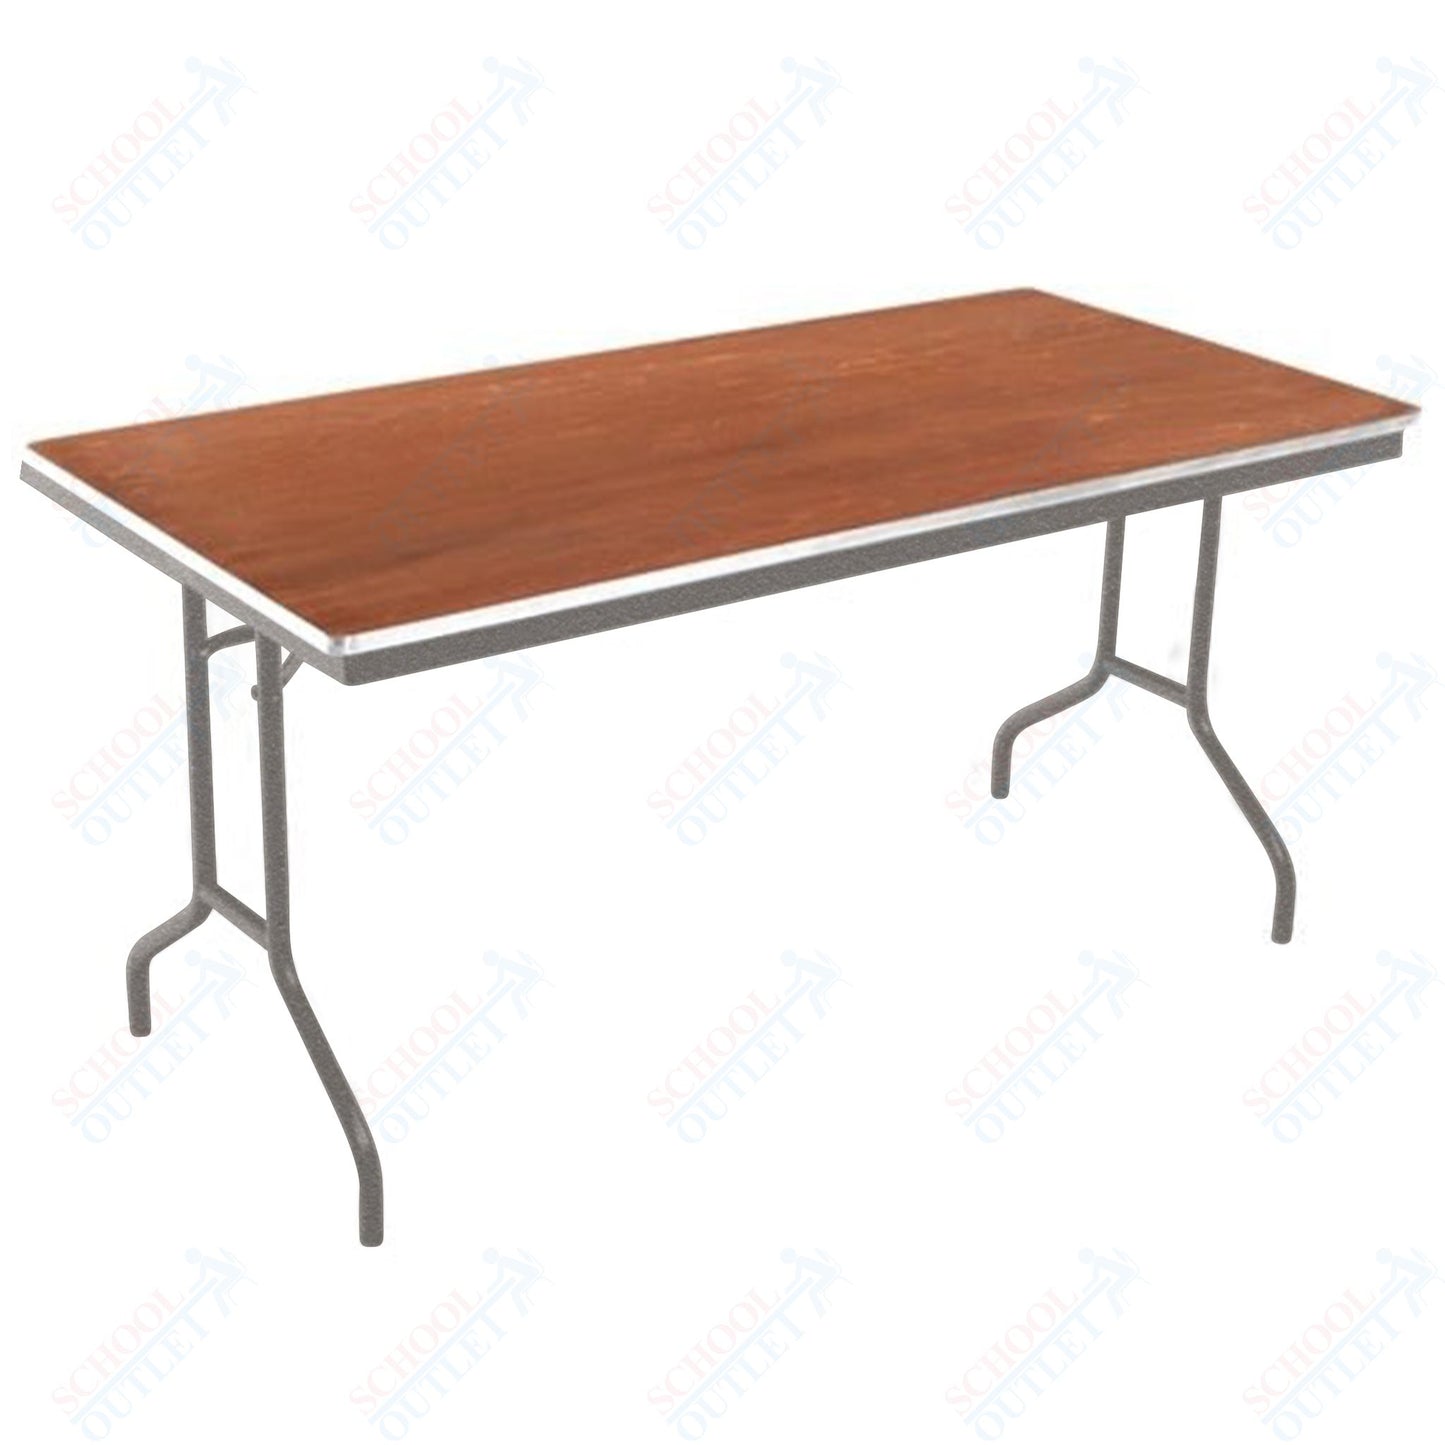 AmTab Folding Table - Plywood Stained and Sealed - Aluminum Edge - 18"W x 60"L x 29"H  (AmTab AMT-185PA)